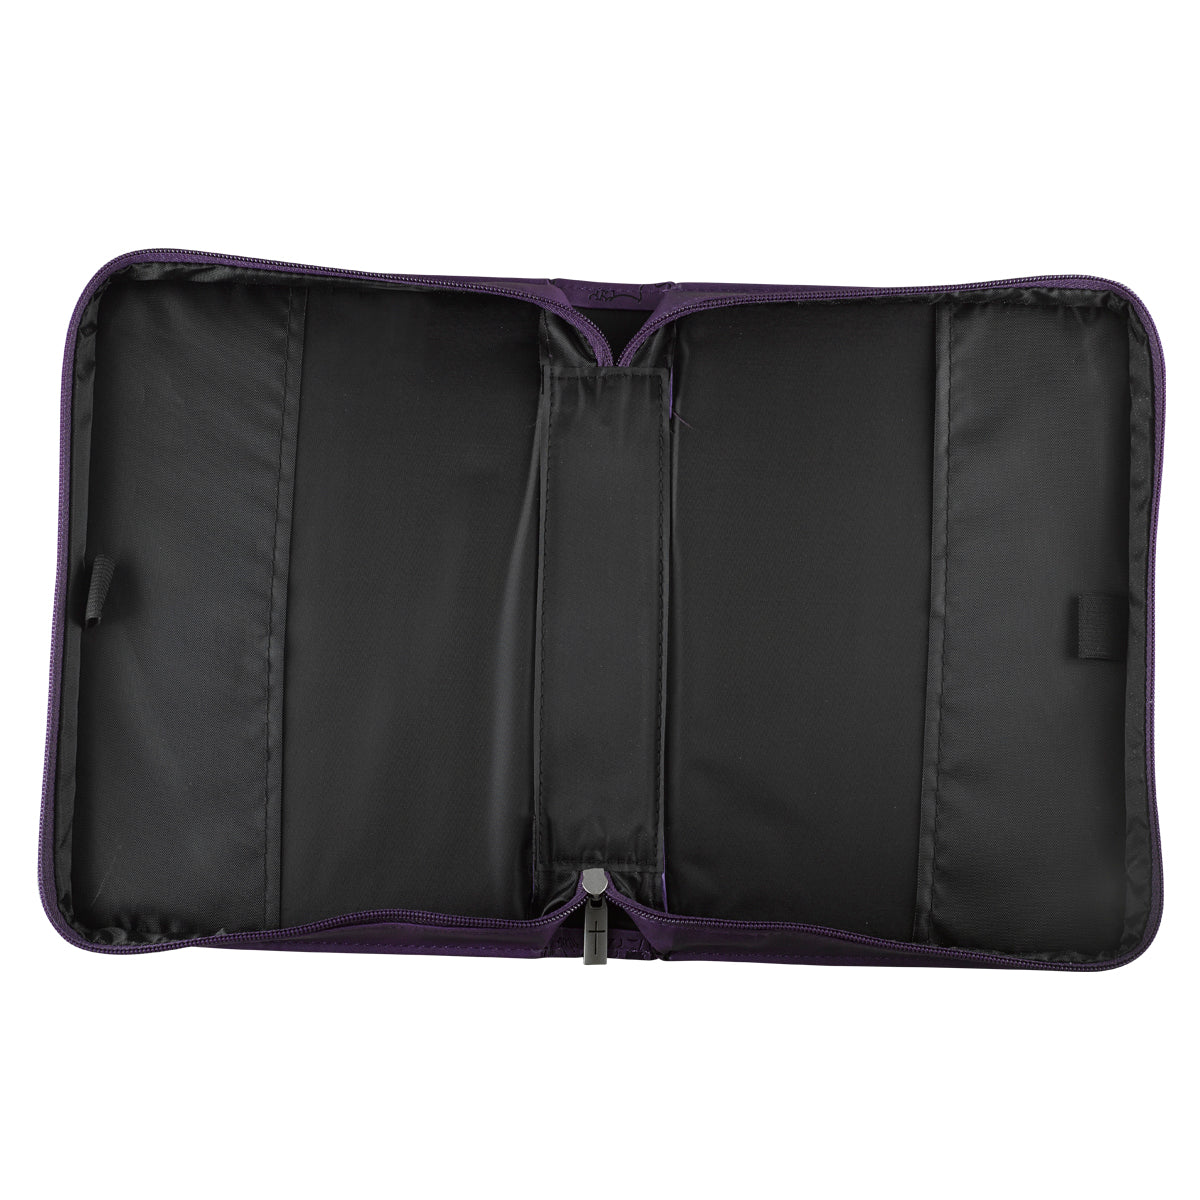 I Can Do All Things Purple Faux Leather Fashion Bible Cover - Philippians 4:13 - The Christian Gift Company